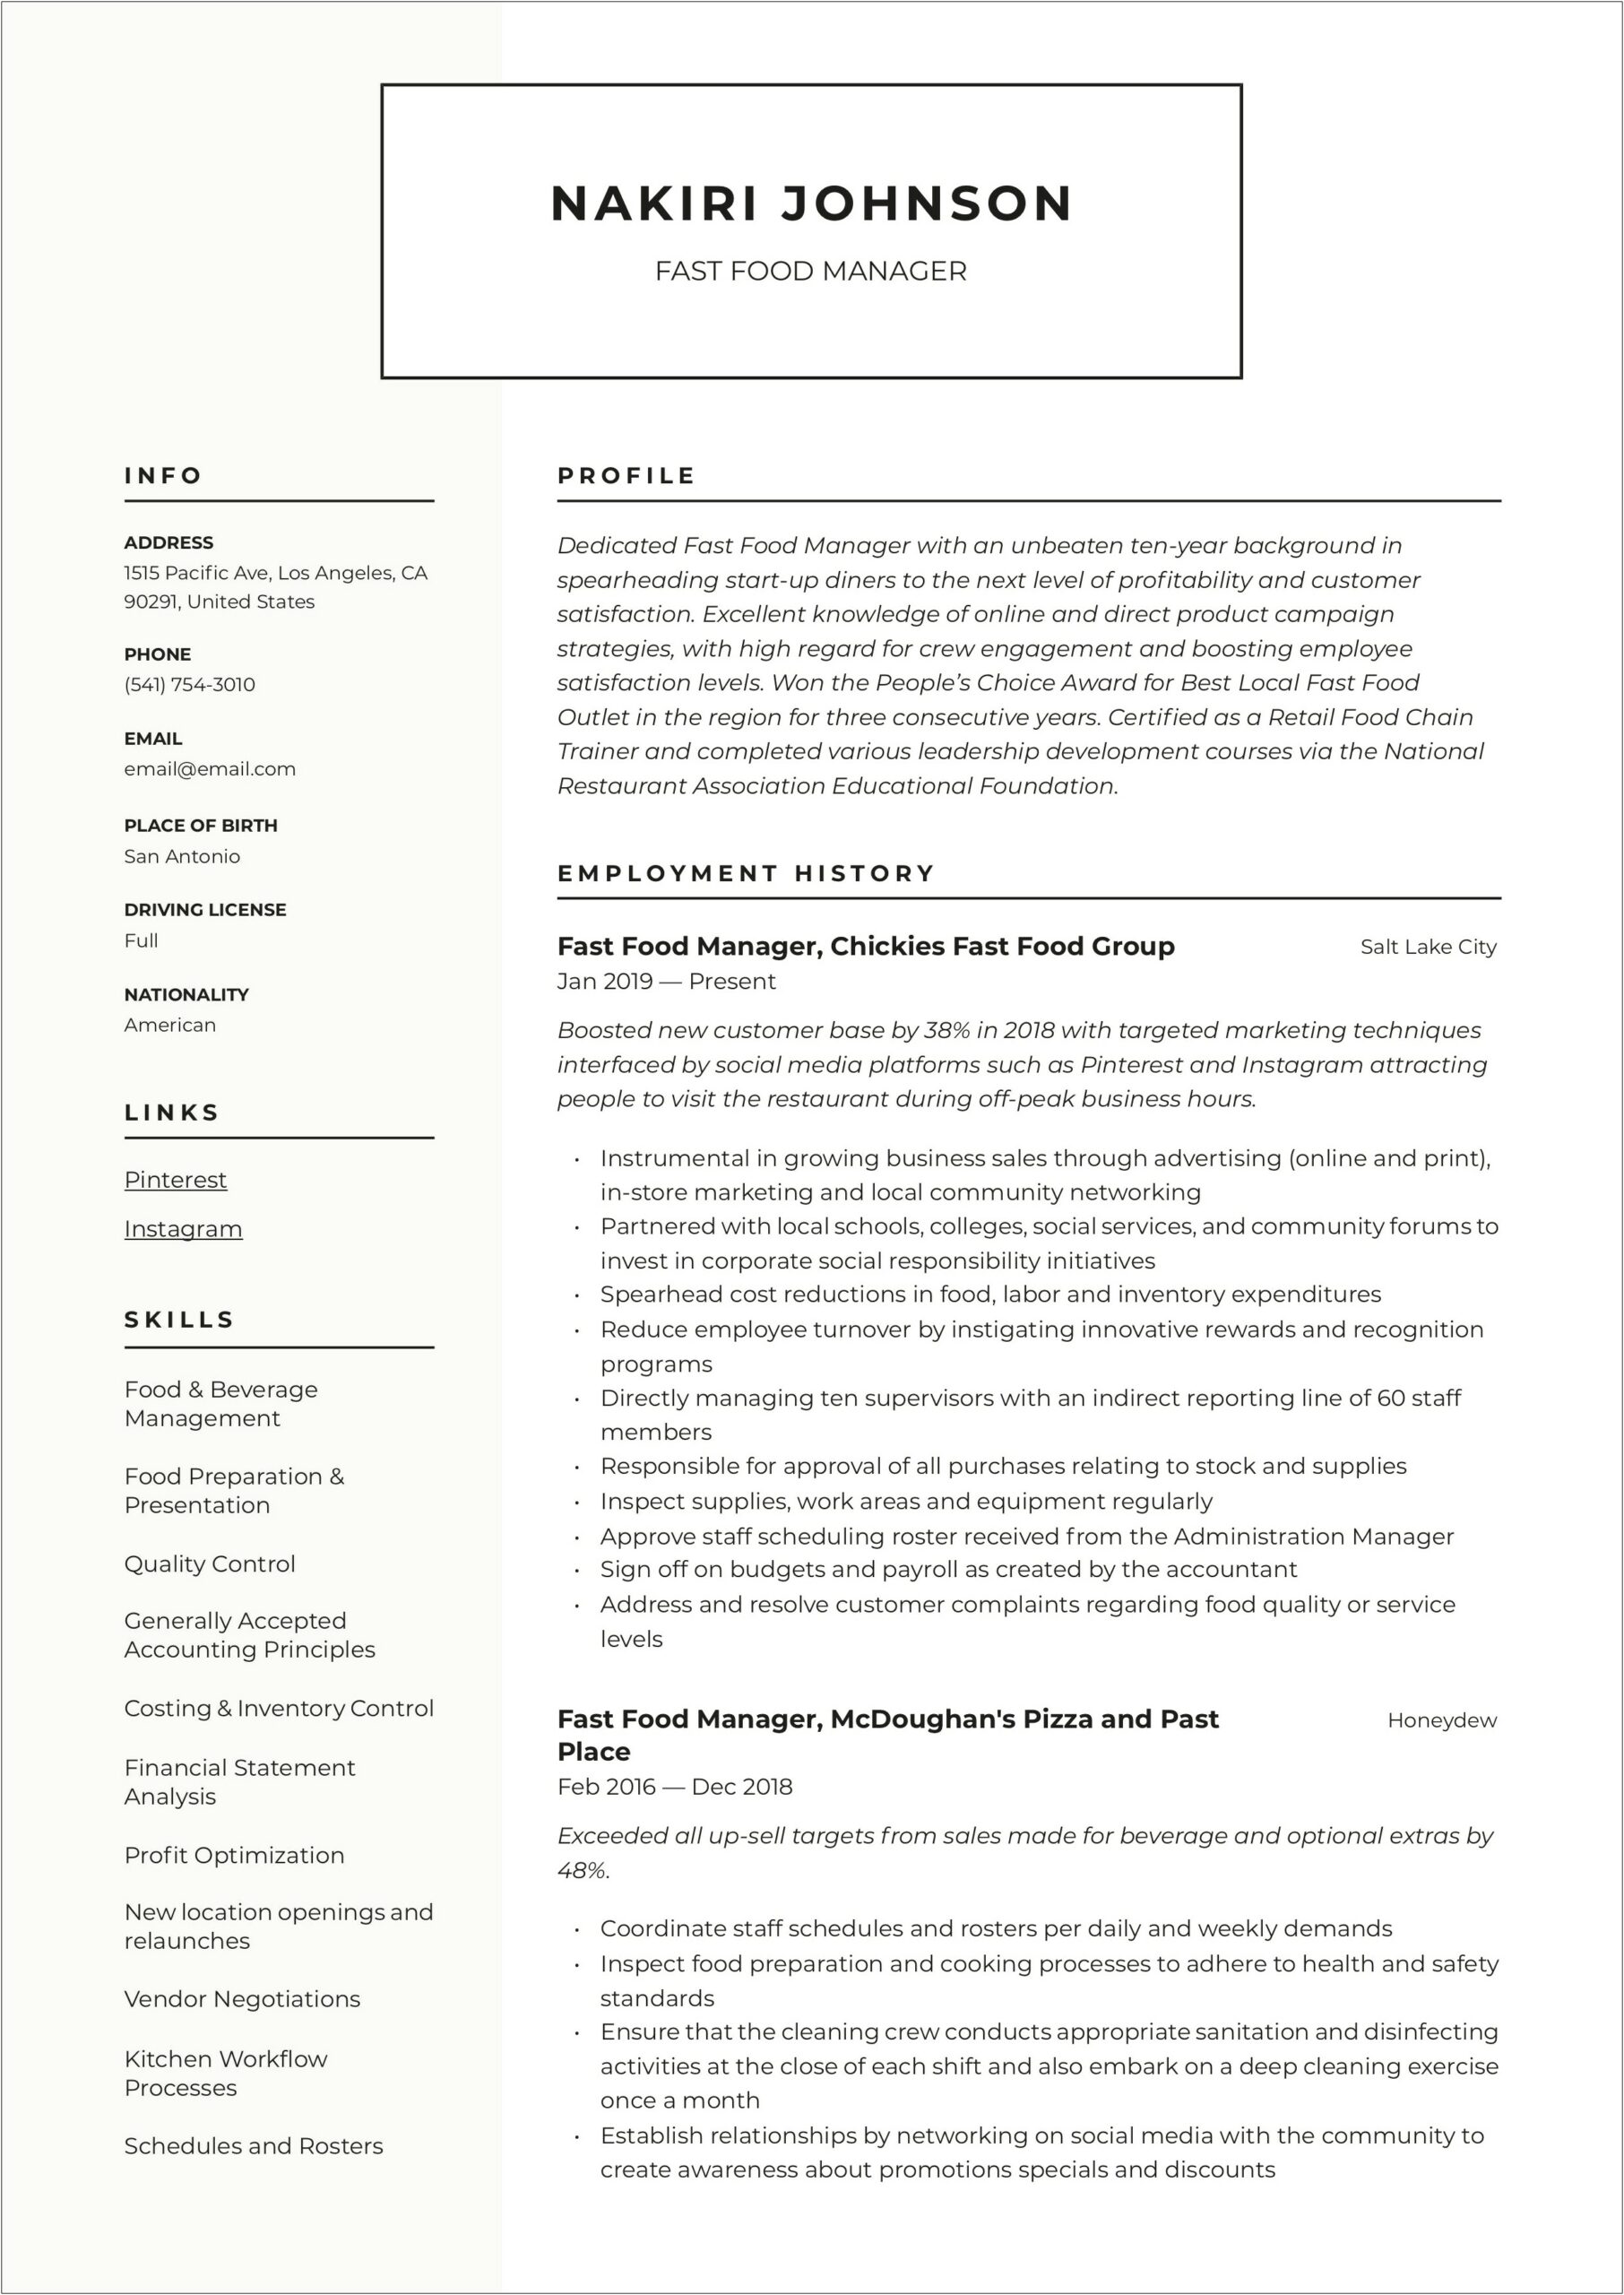 Resume Bullet Points For Food And Beverage Manager